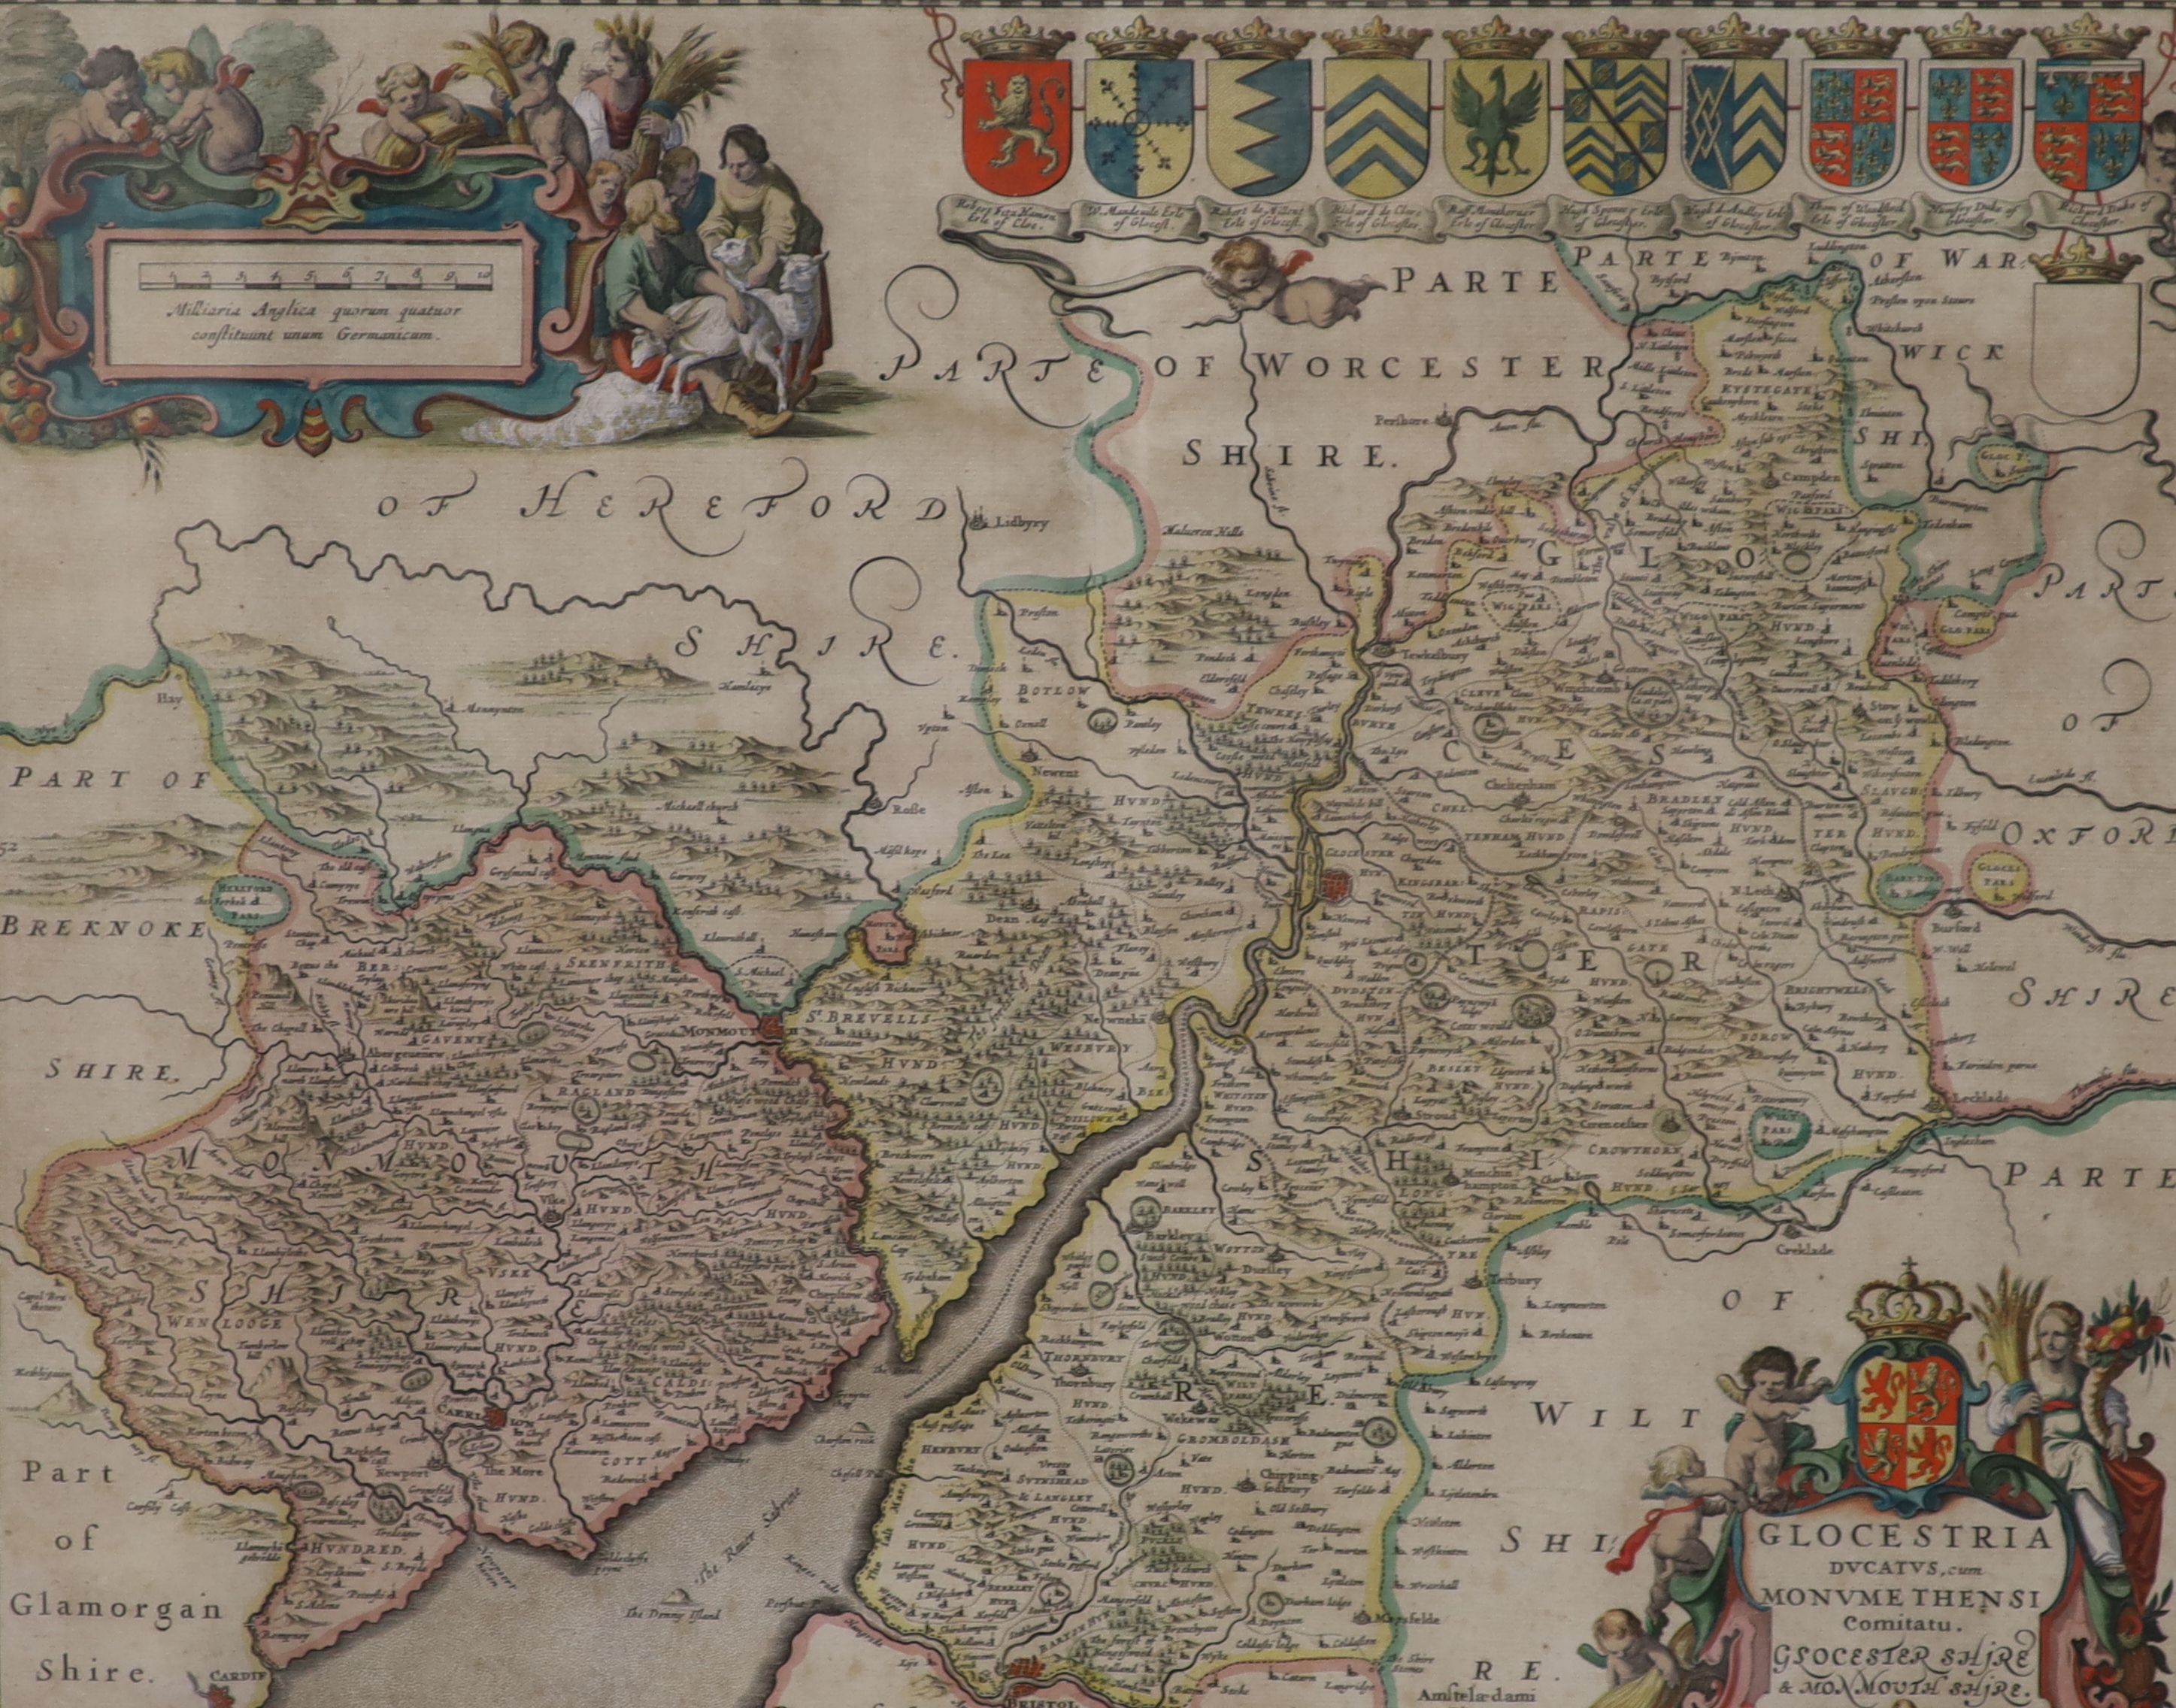 Valk and Shenk, coloured engraving, Map of Glocestria, 42 x 52cm